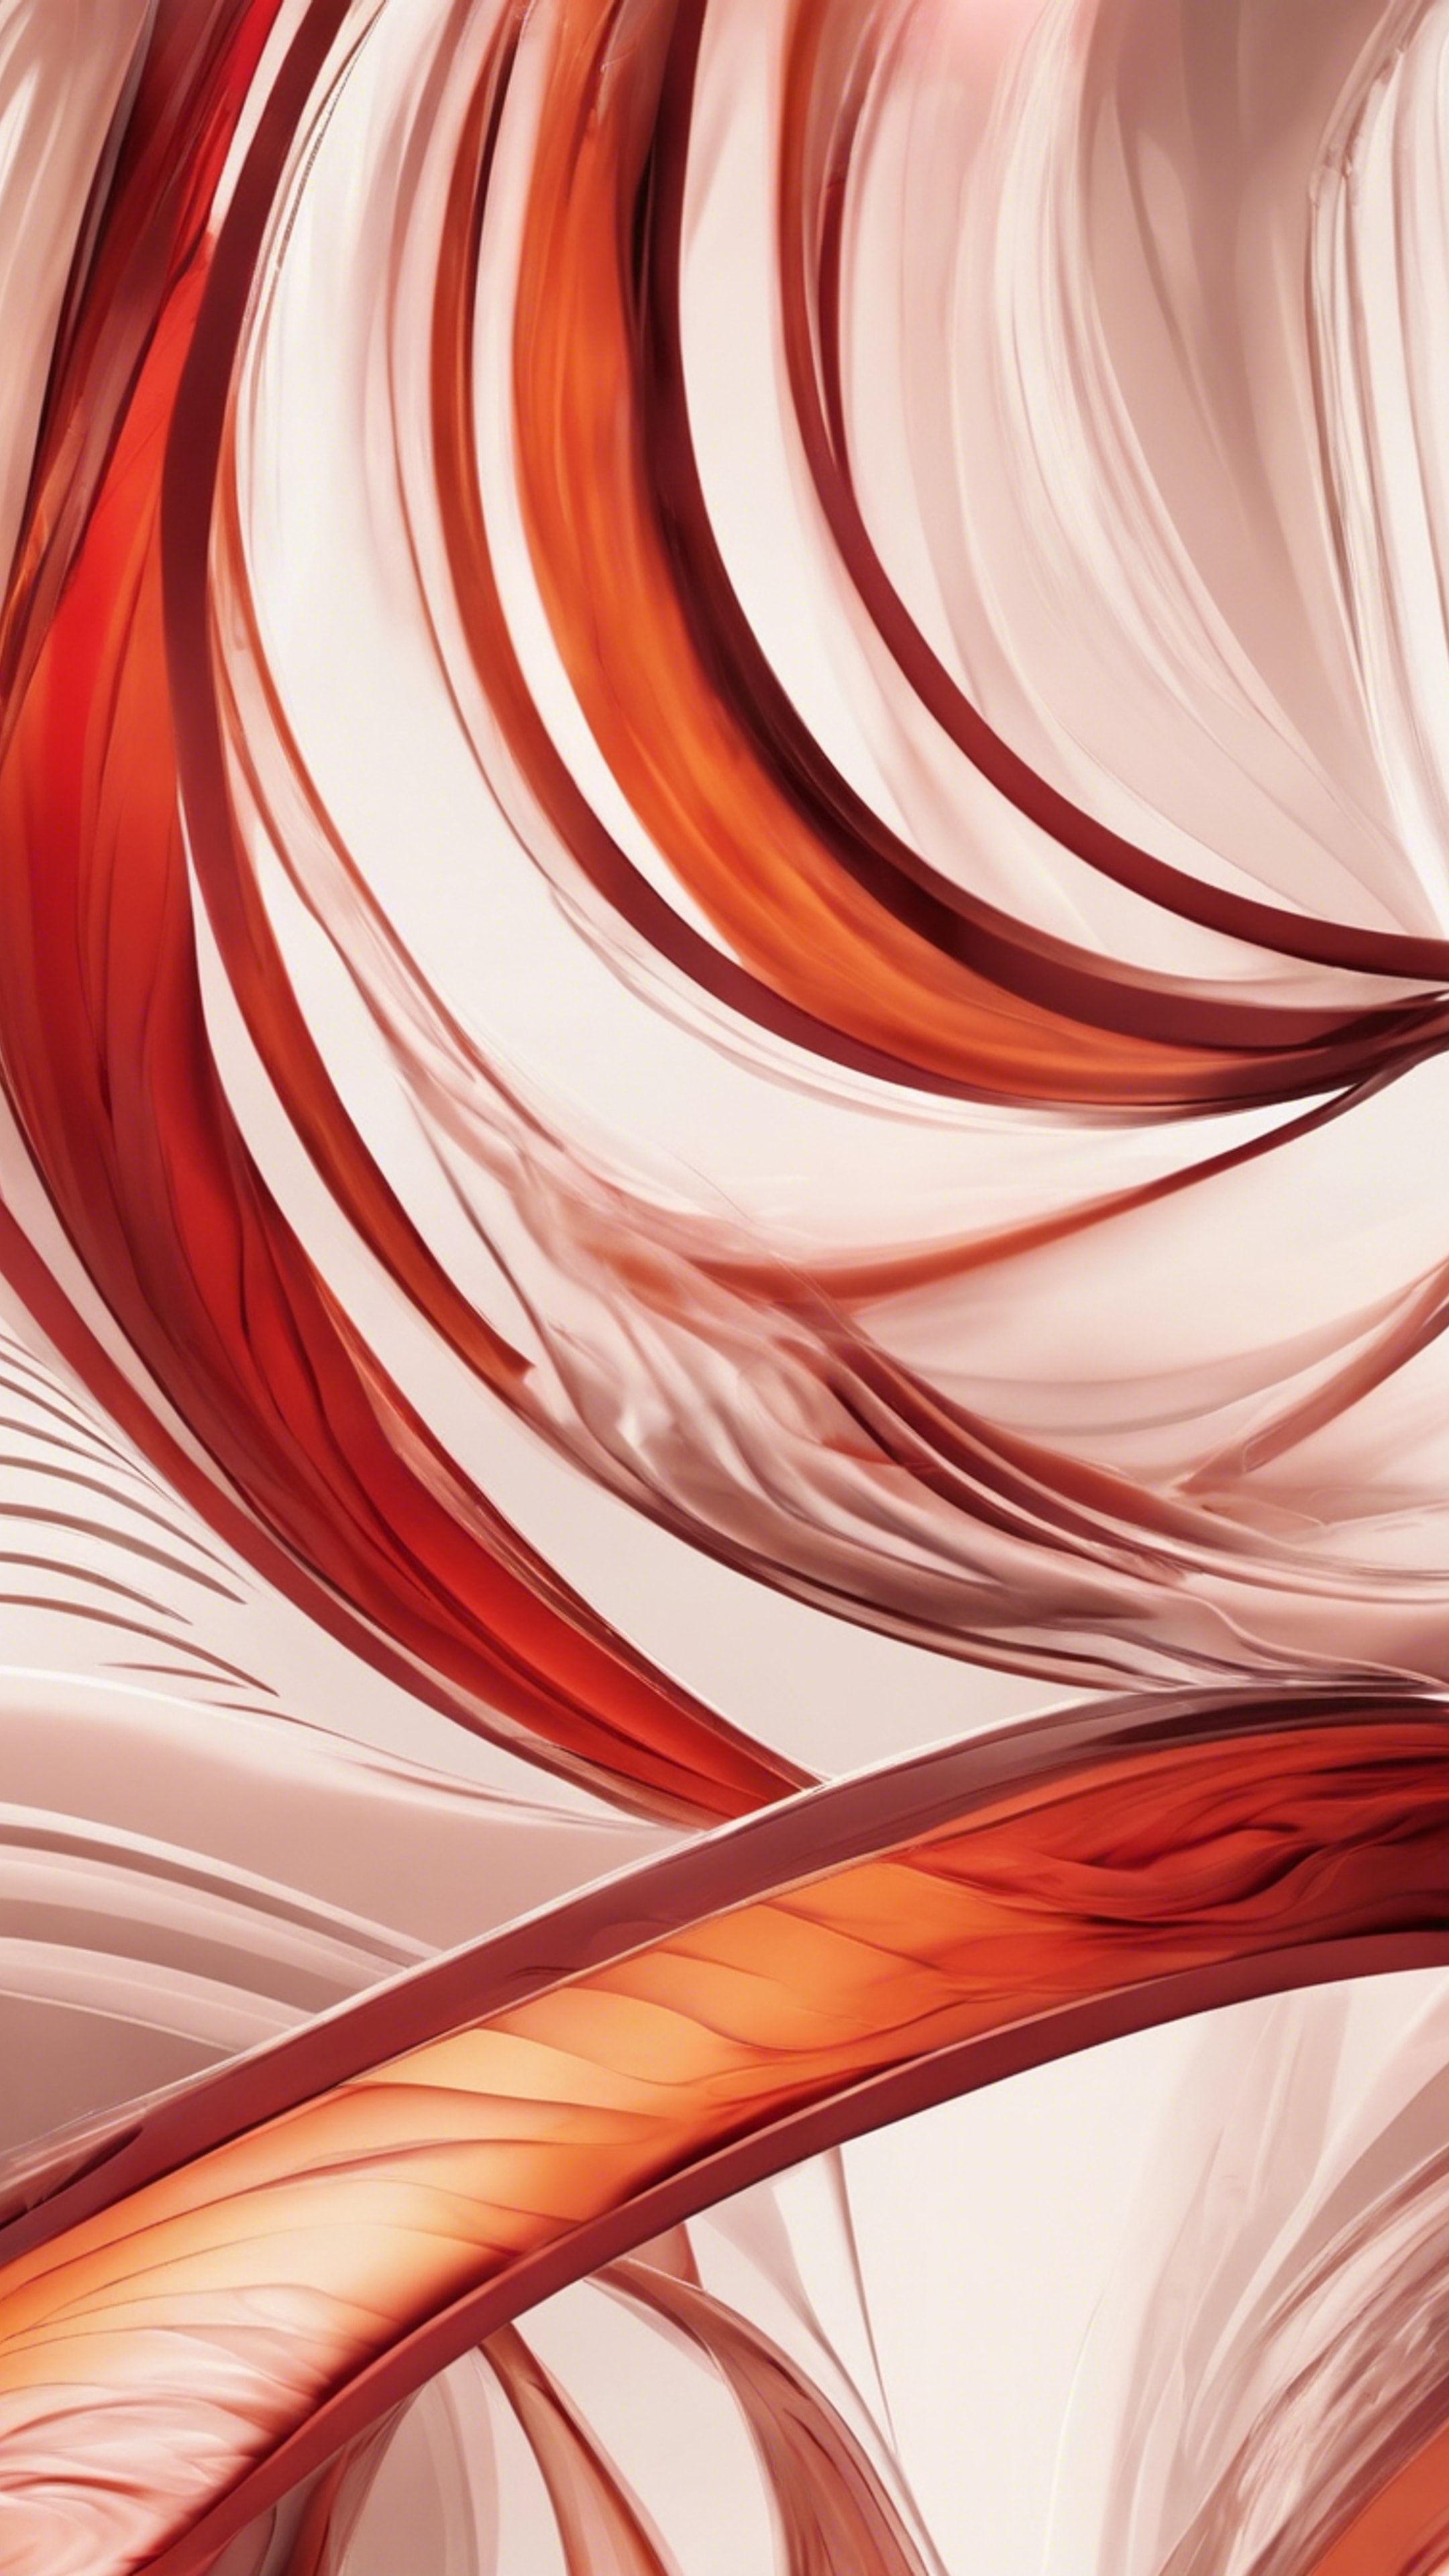 An abstract design with colorful red and orange curves, swaying together creating a harmonious and seamless pattern. Wallpaper[ffba5bcaa09c44adbe05]